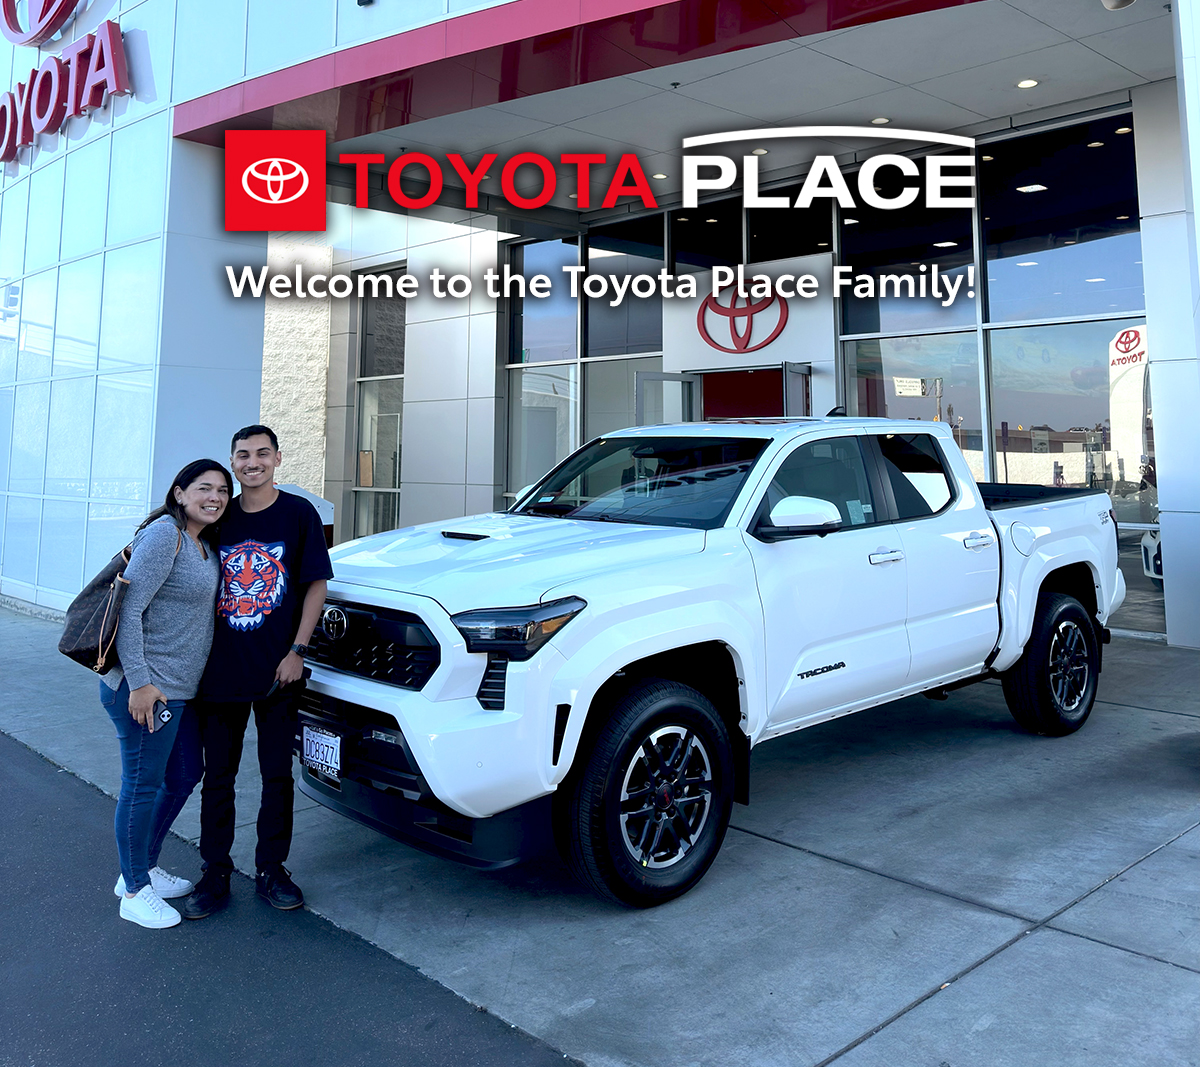 😍Tacoma ❤️Tacoma 💪Tacoma...🥇Incredible and ❤️gorgeous all-new Toyota 😍Tacoma 🗲TRD Sport💨. 🎉🎉 Congratulations 👏🏻 and 🤗thank you for choosing 😊Toyota Place. We wish you many incredible 🌄adventures going places in your new #tacoma truck. #toyotaplace #toyotatacoma